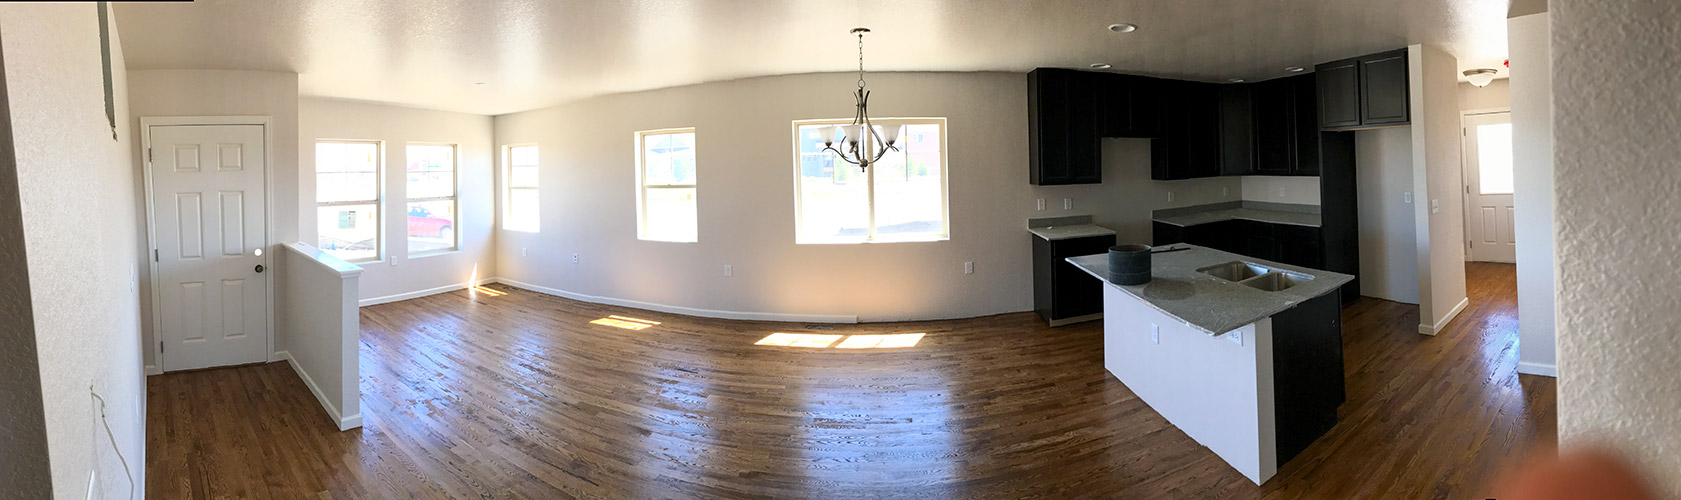 Living Room, Dining Room and Kitchen